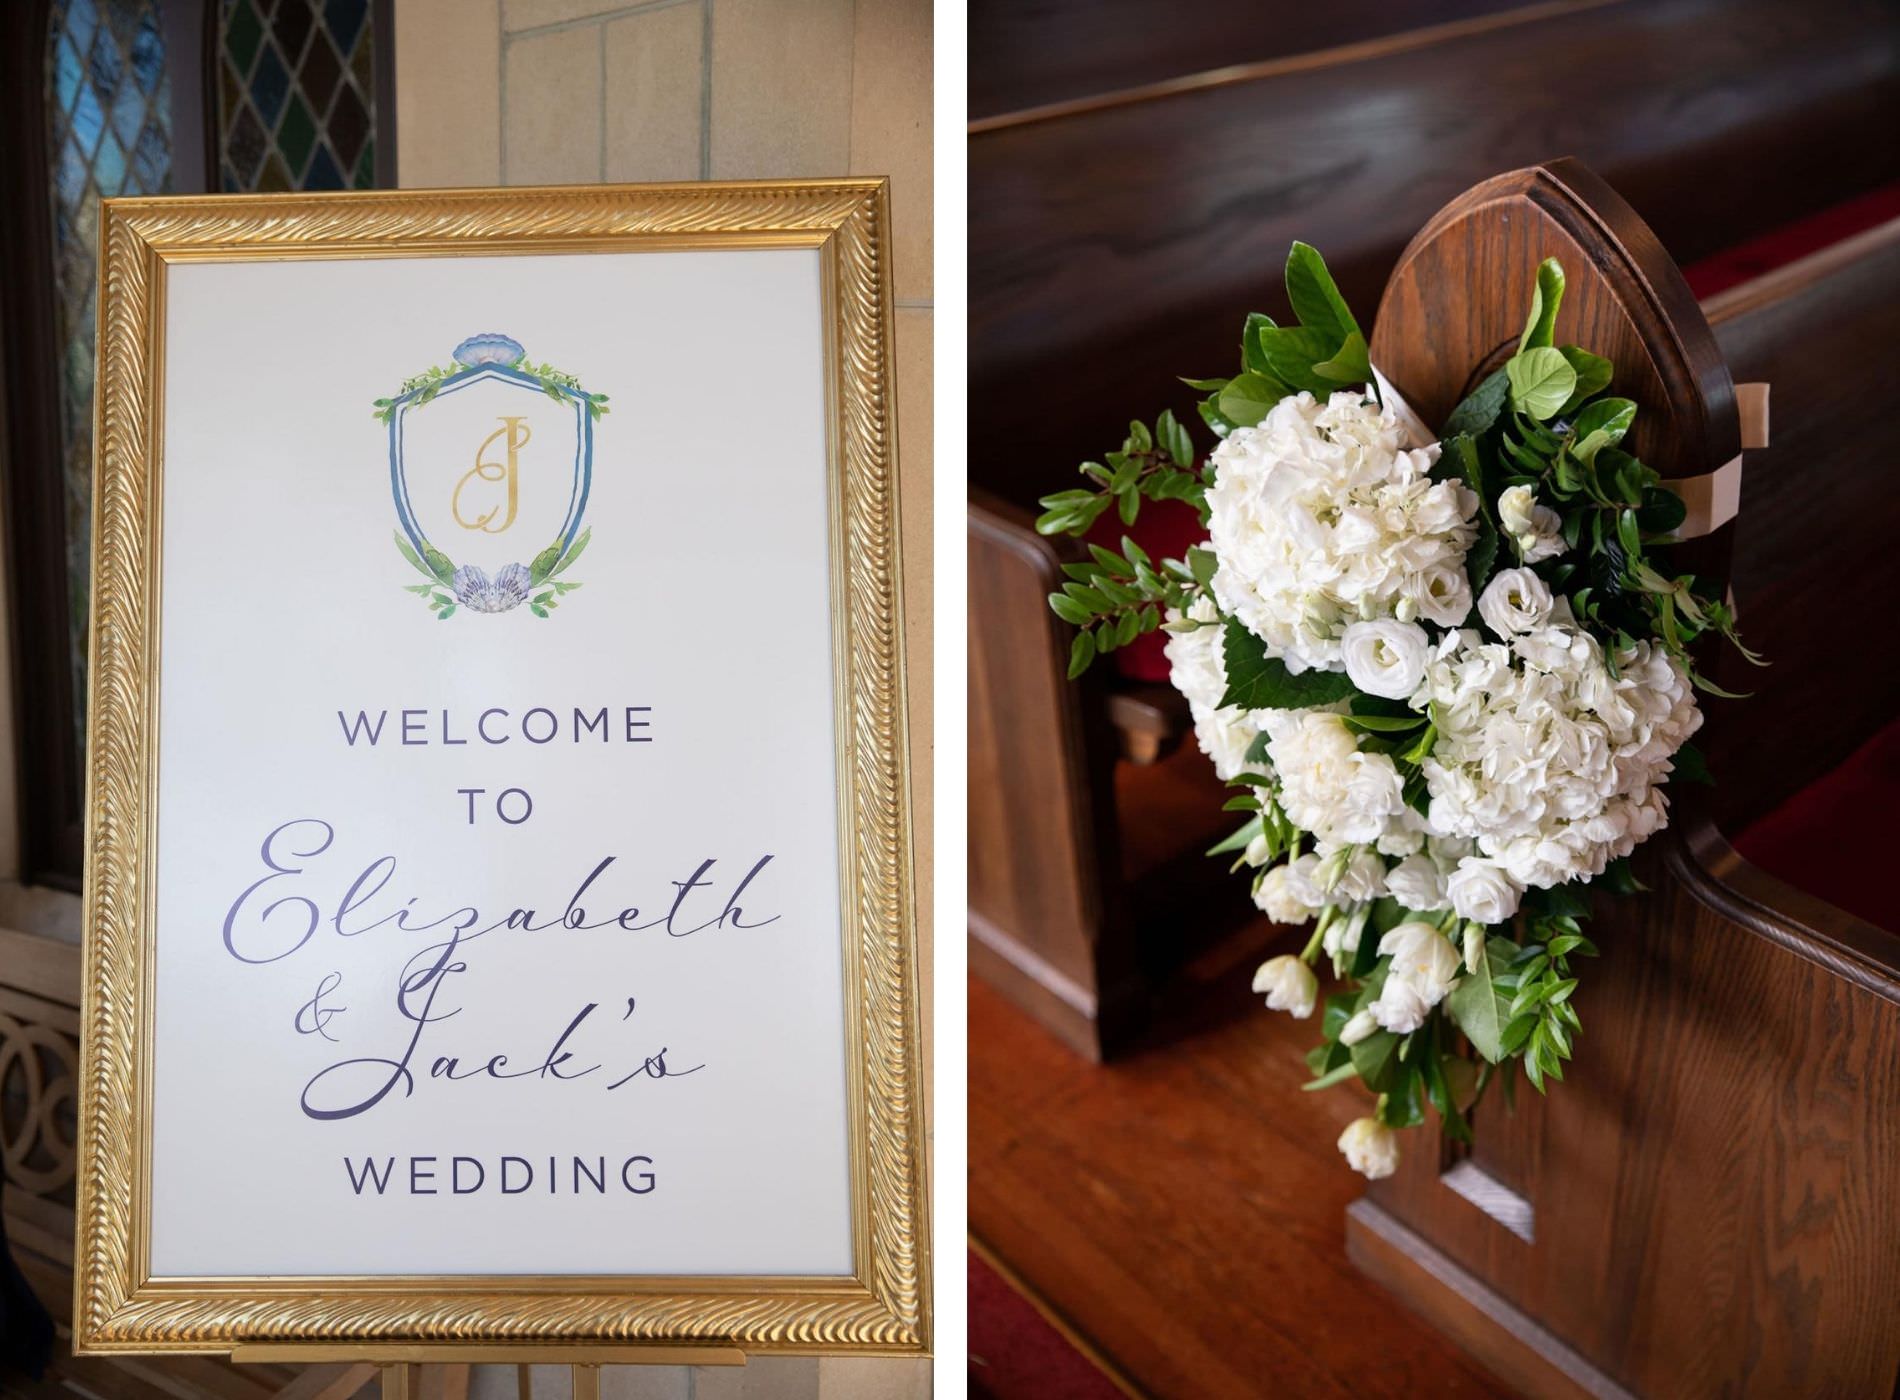 Classic Traditional Wedding Ceremony Decor, Gold Frame Welcome Sign with Personalized Monogram, White Roses and Hydrangeas and Greenery Floral Bouquet on Church Pew | Tampa Bay Wedding Planner Parties A'la Carte